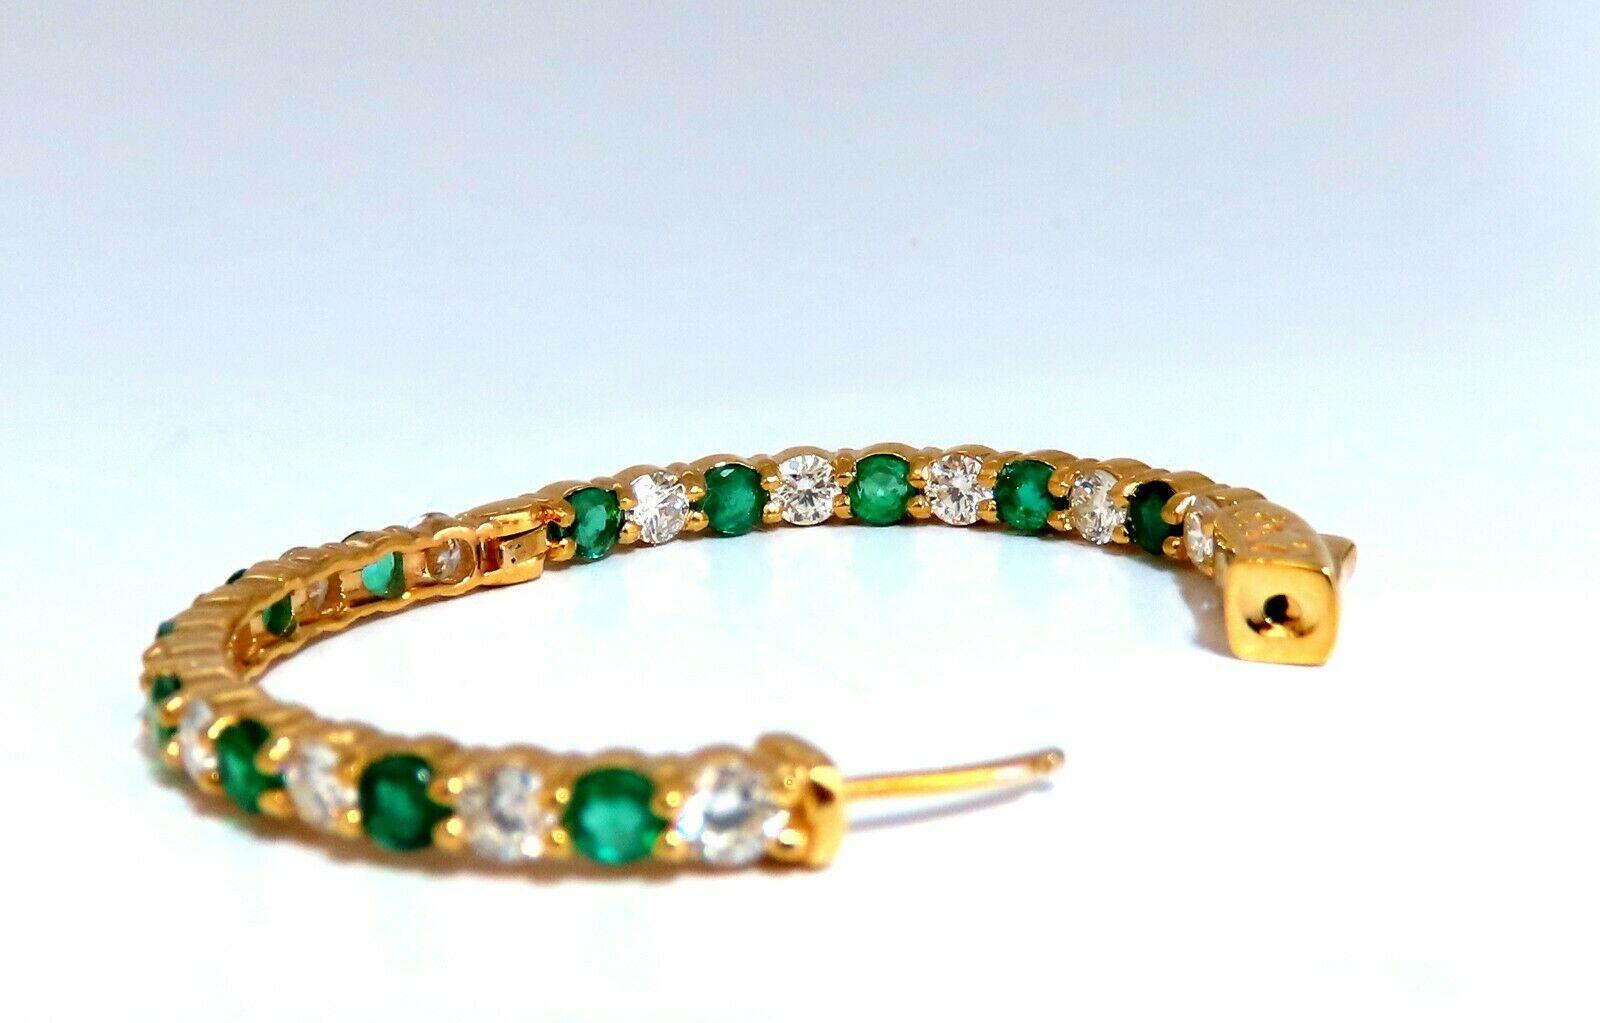 3.77ct Natural Emerald Diamonds Hoop Earrings 14kt Yellow Gold Inside Out For Sale 1